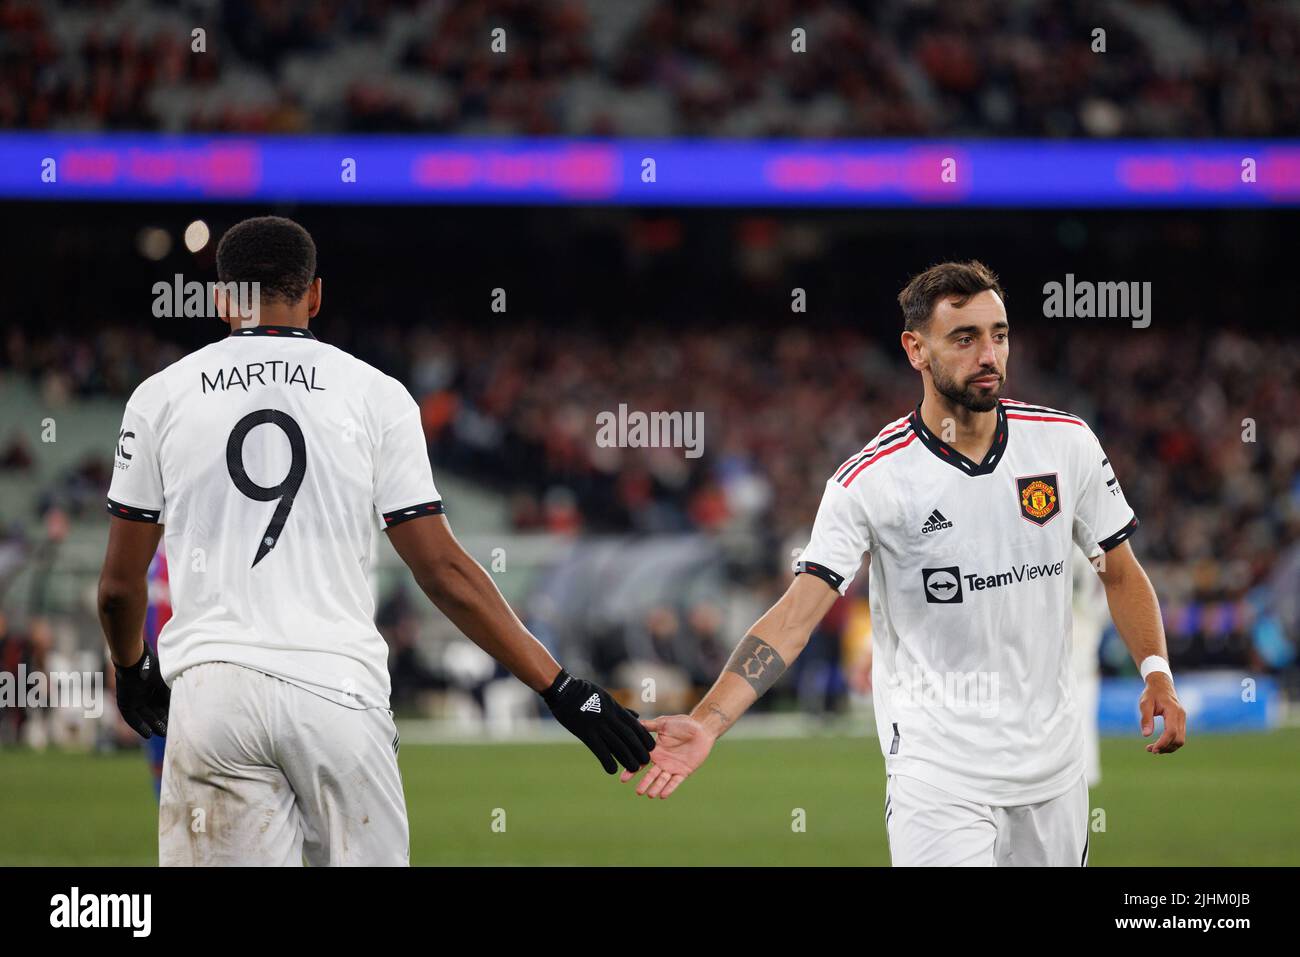 Melbourne, Australia, 19 Jul 2022. Manchester United vs Crystal Palace at Melbourne Cricket Ground (MCG) on 19 Jul 2022. Anthony Martial and Bruno Fernandes. Credit: corleve/Alamy Stock Photo Stock Photo